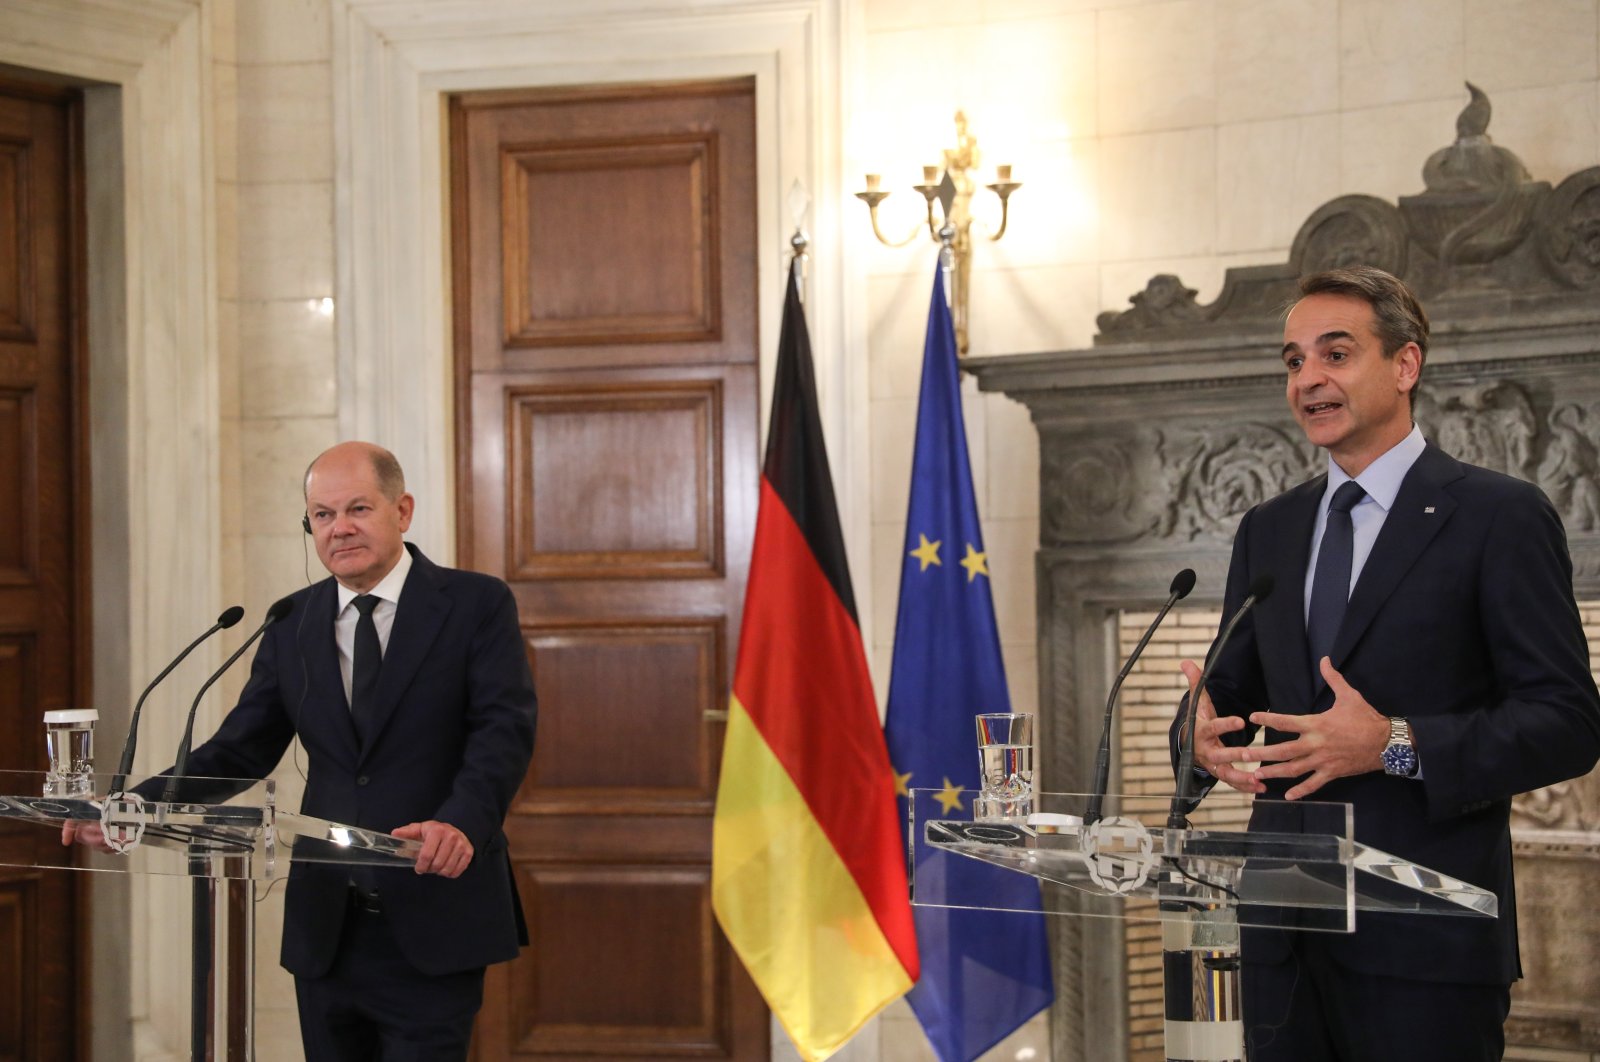 Greek Prime Minister Kyriakos Mitsotakis (R) and German Chancellor Olaf Scholz make statements during a press conference following their meeting at the Maximos Palace in Athens, Greece, Oct. 27, 2022. (EPA Photo)